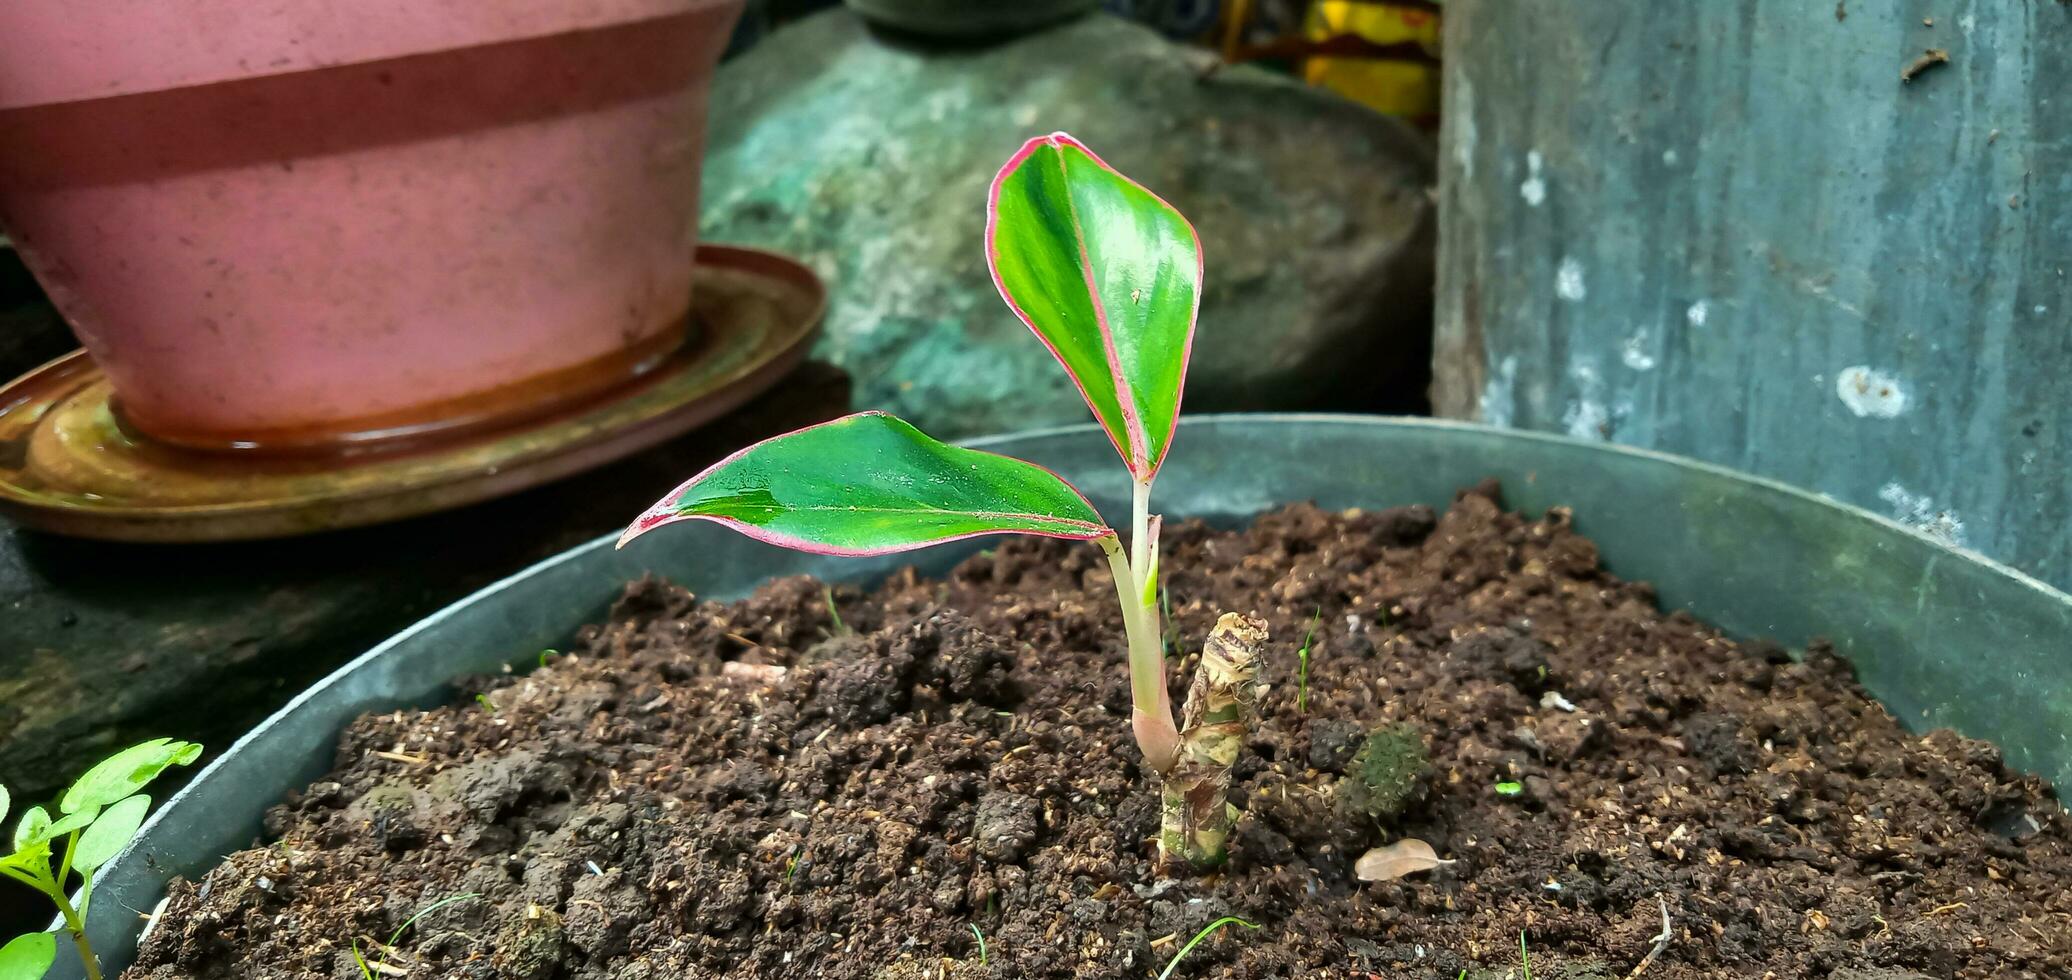 Plant seed of Aglaonema Siam Aurora or also known as Aglonema Lipstic is grown in pots, house plant, soil, indoor, hobby, Indoor flower home plant, growth, seed. photo